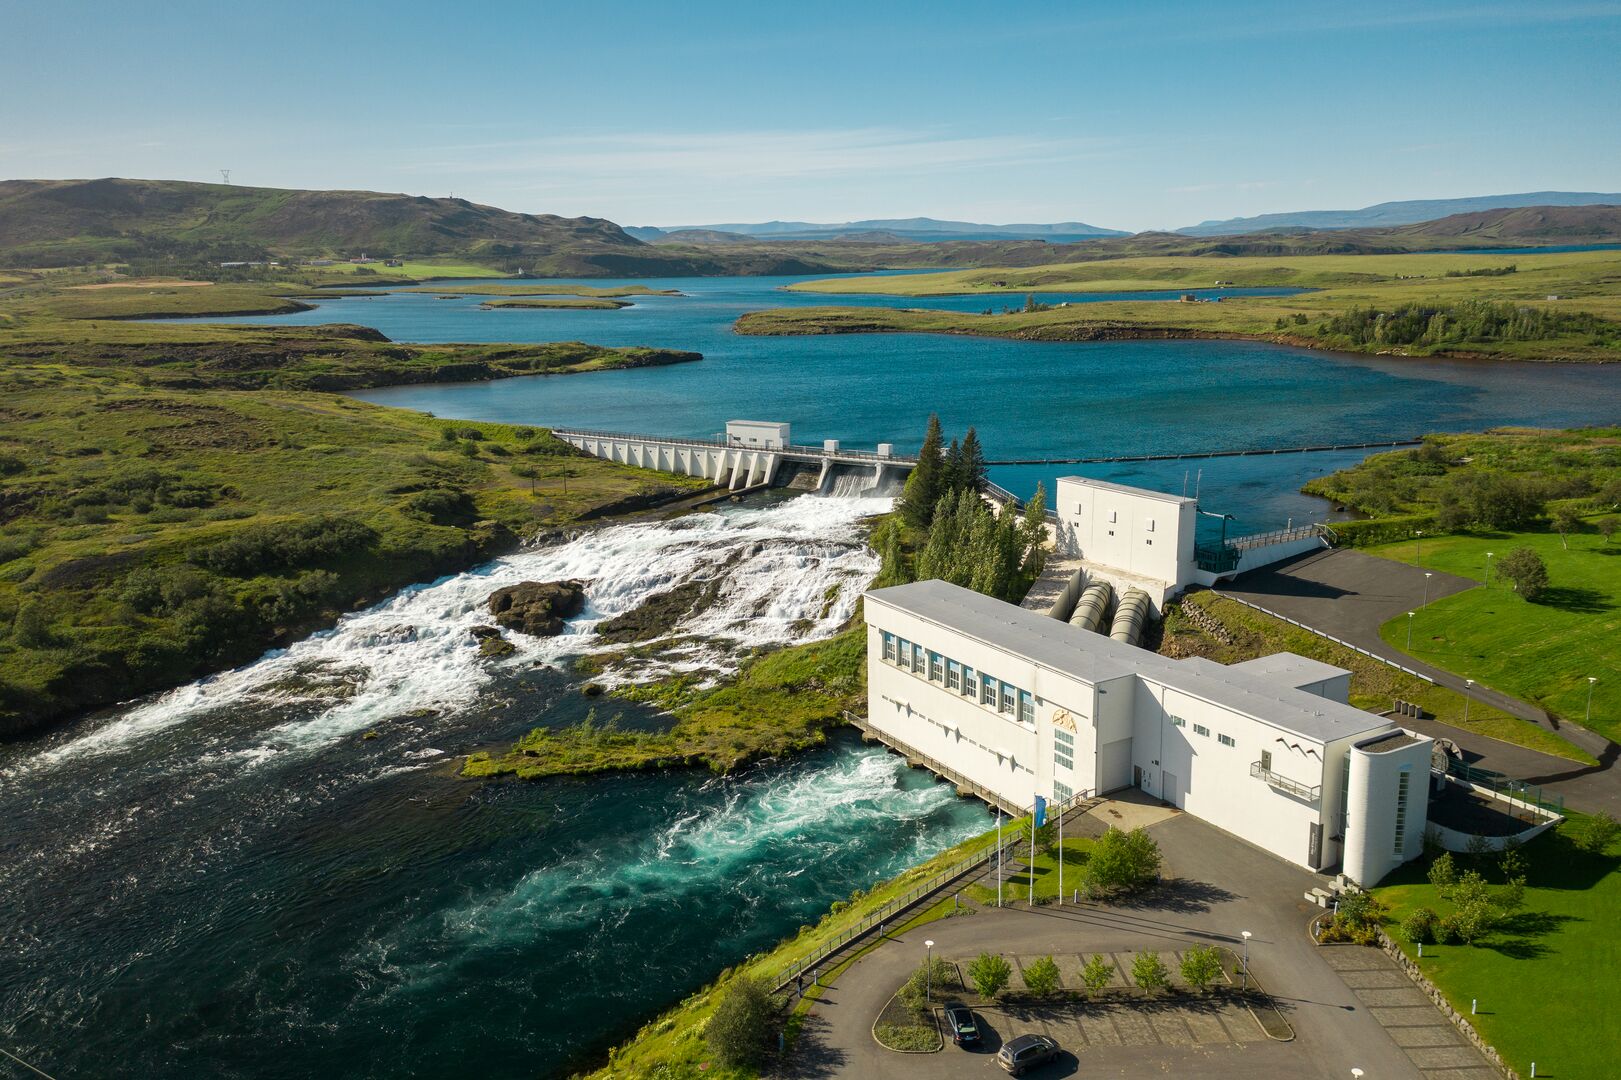 The Ljósafoss hydroelectric power plant in Iceland.